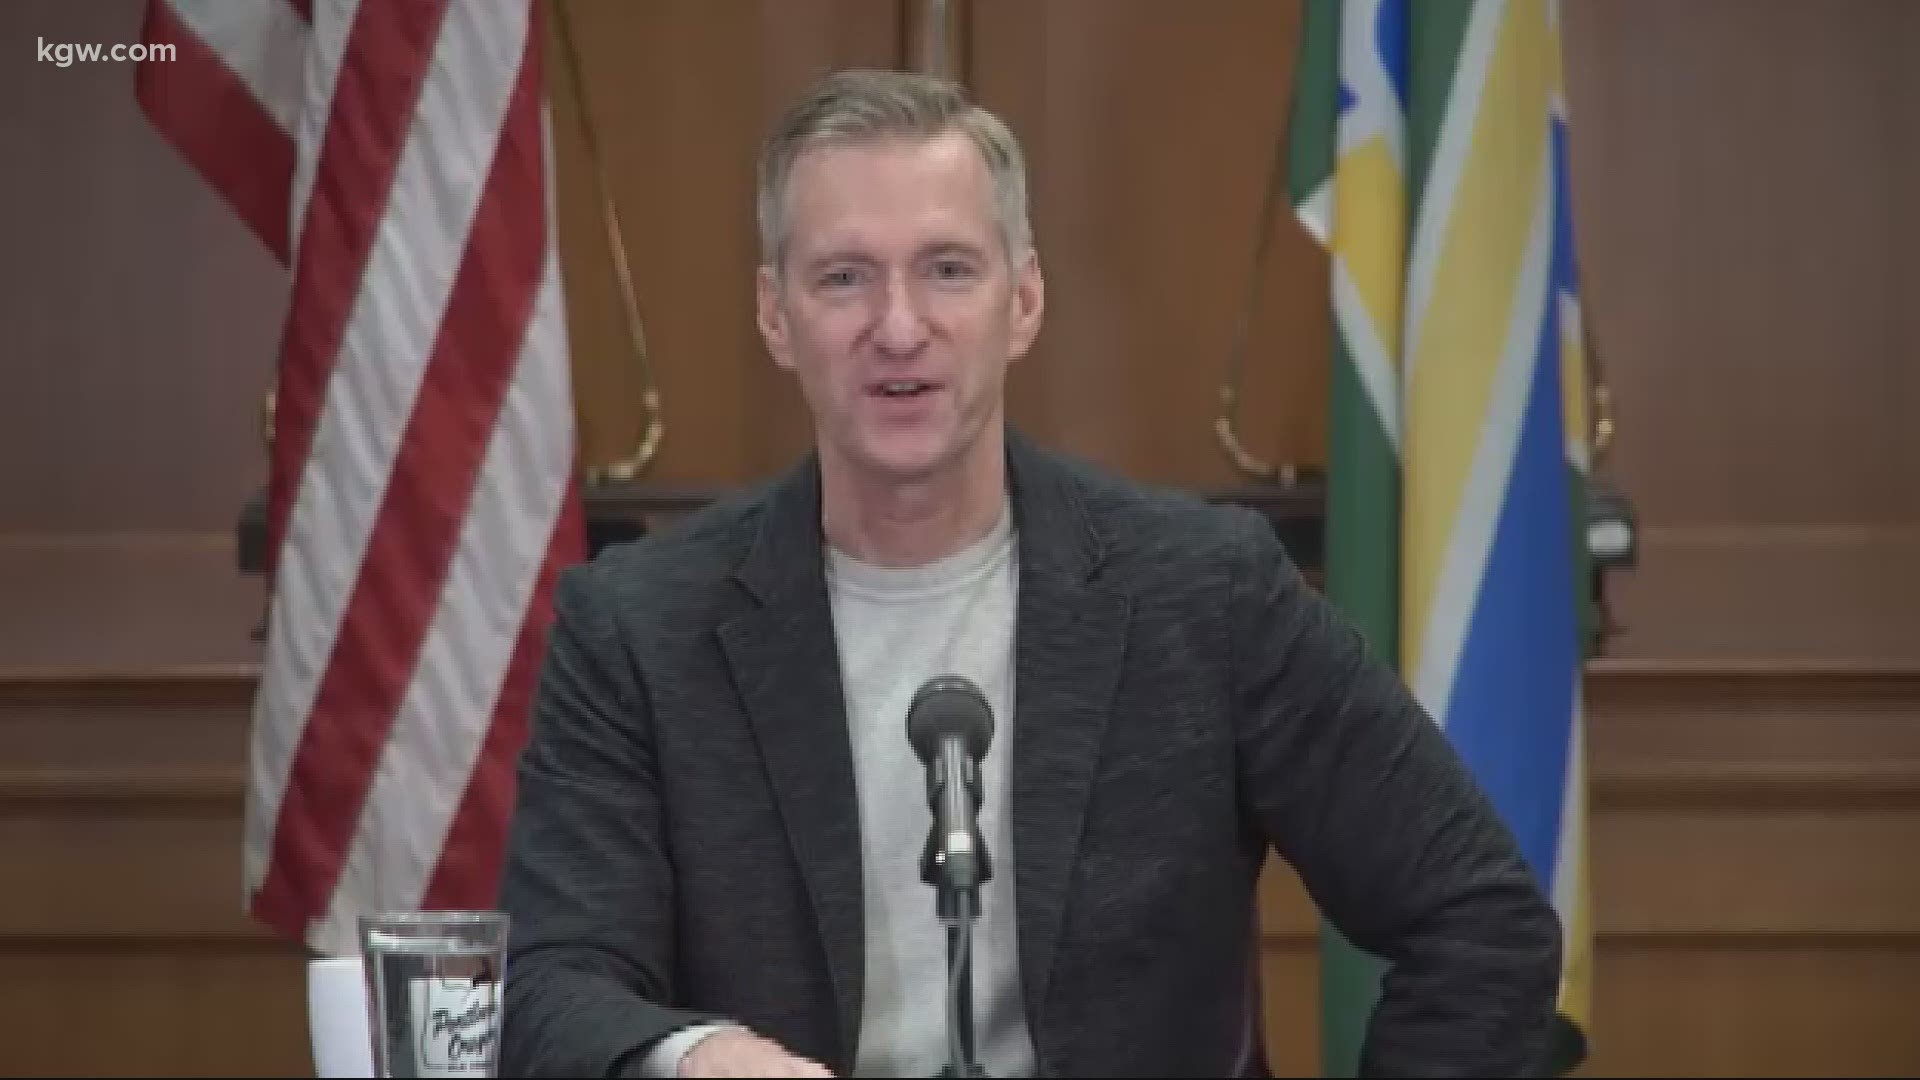 Portland Mayor Ted Wheeler says his first priority is continuing a focus on police reform.